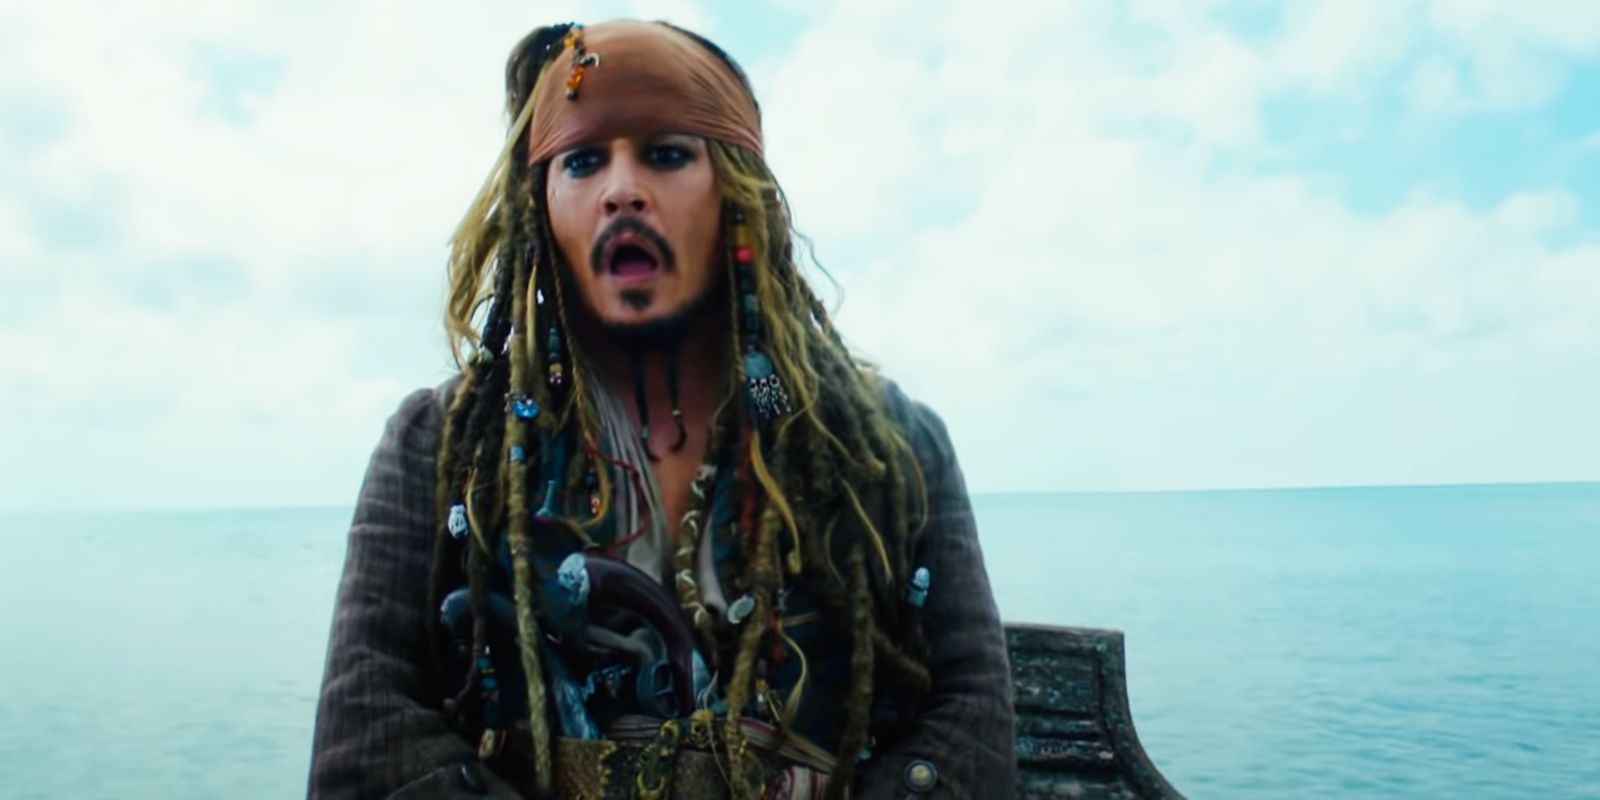 What’s Going On With Johnny Depp In Pirates of the Caribbean 6?